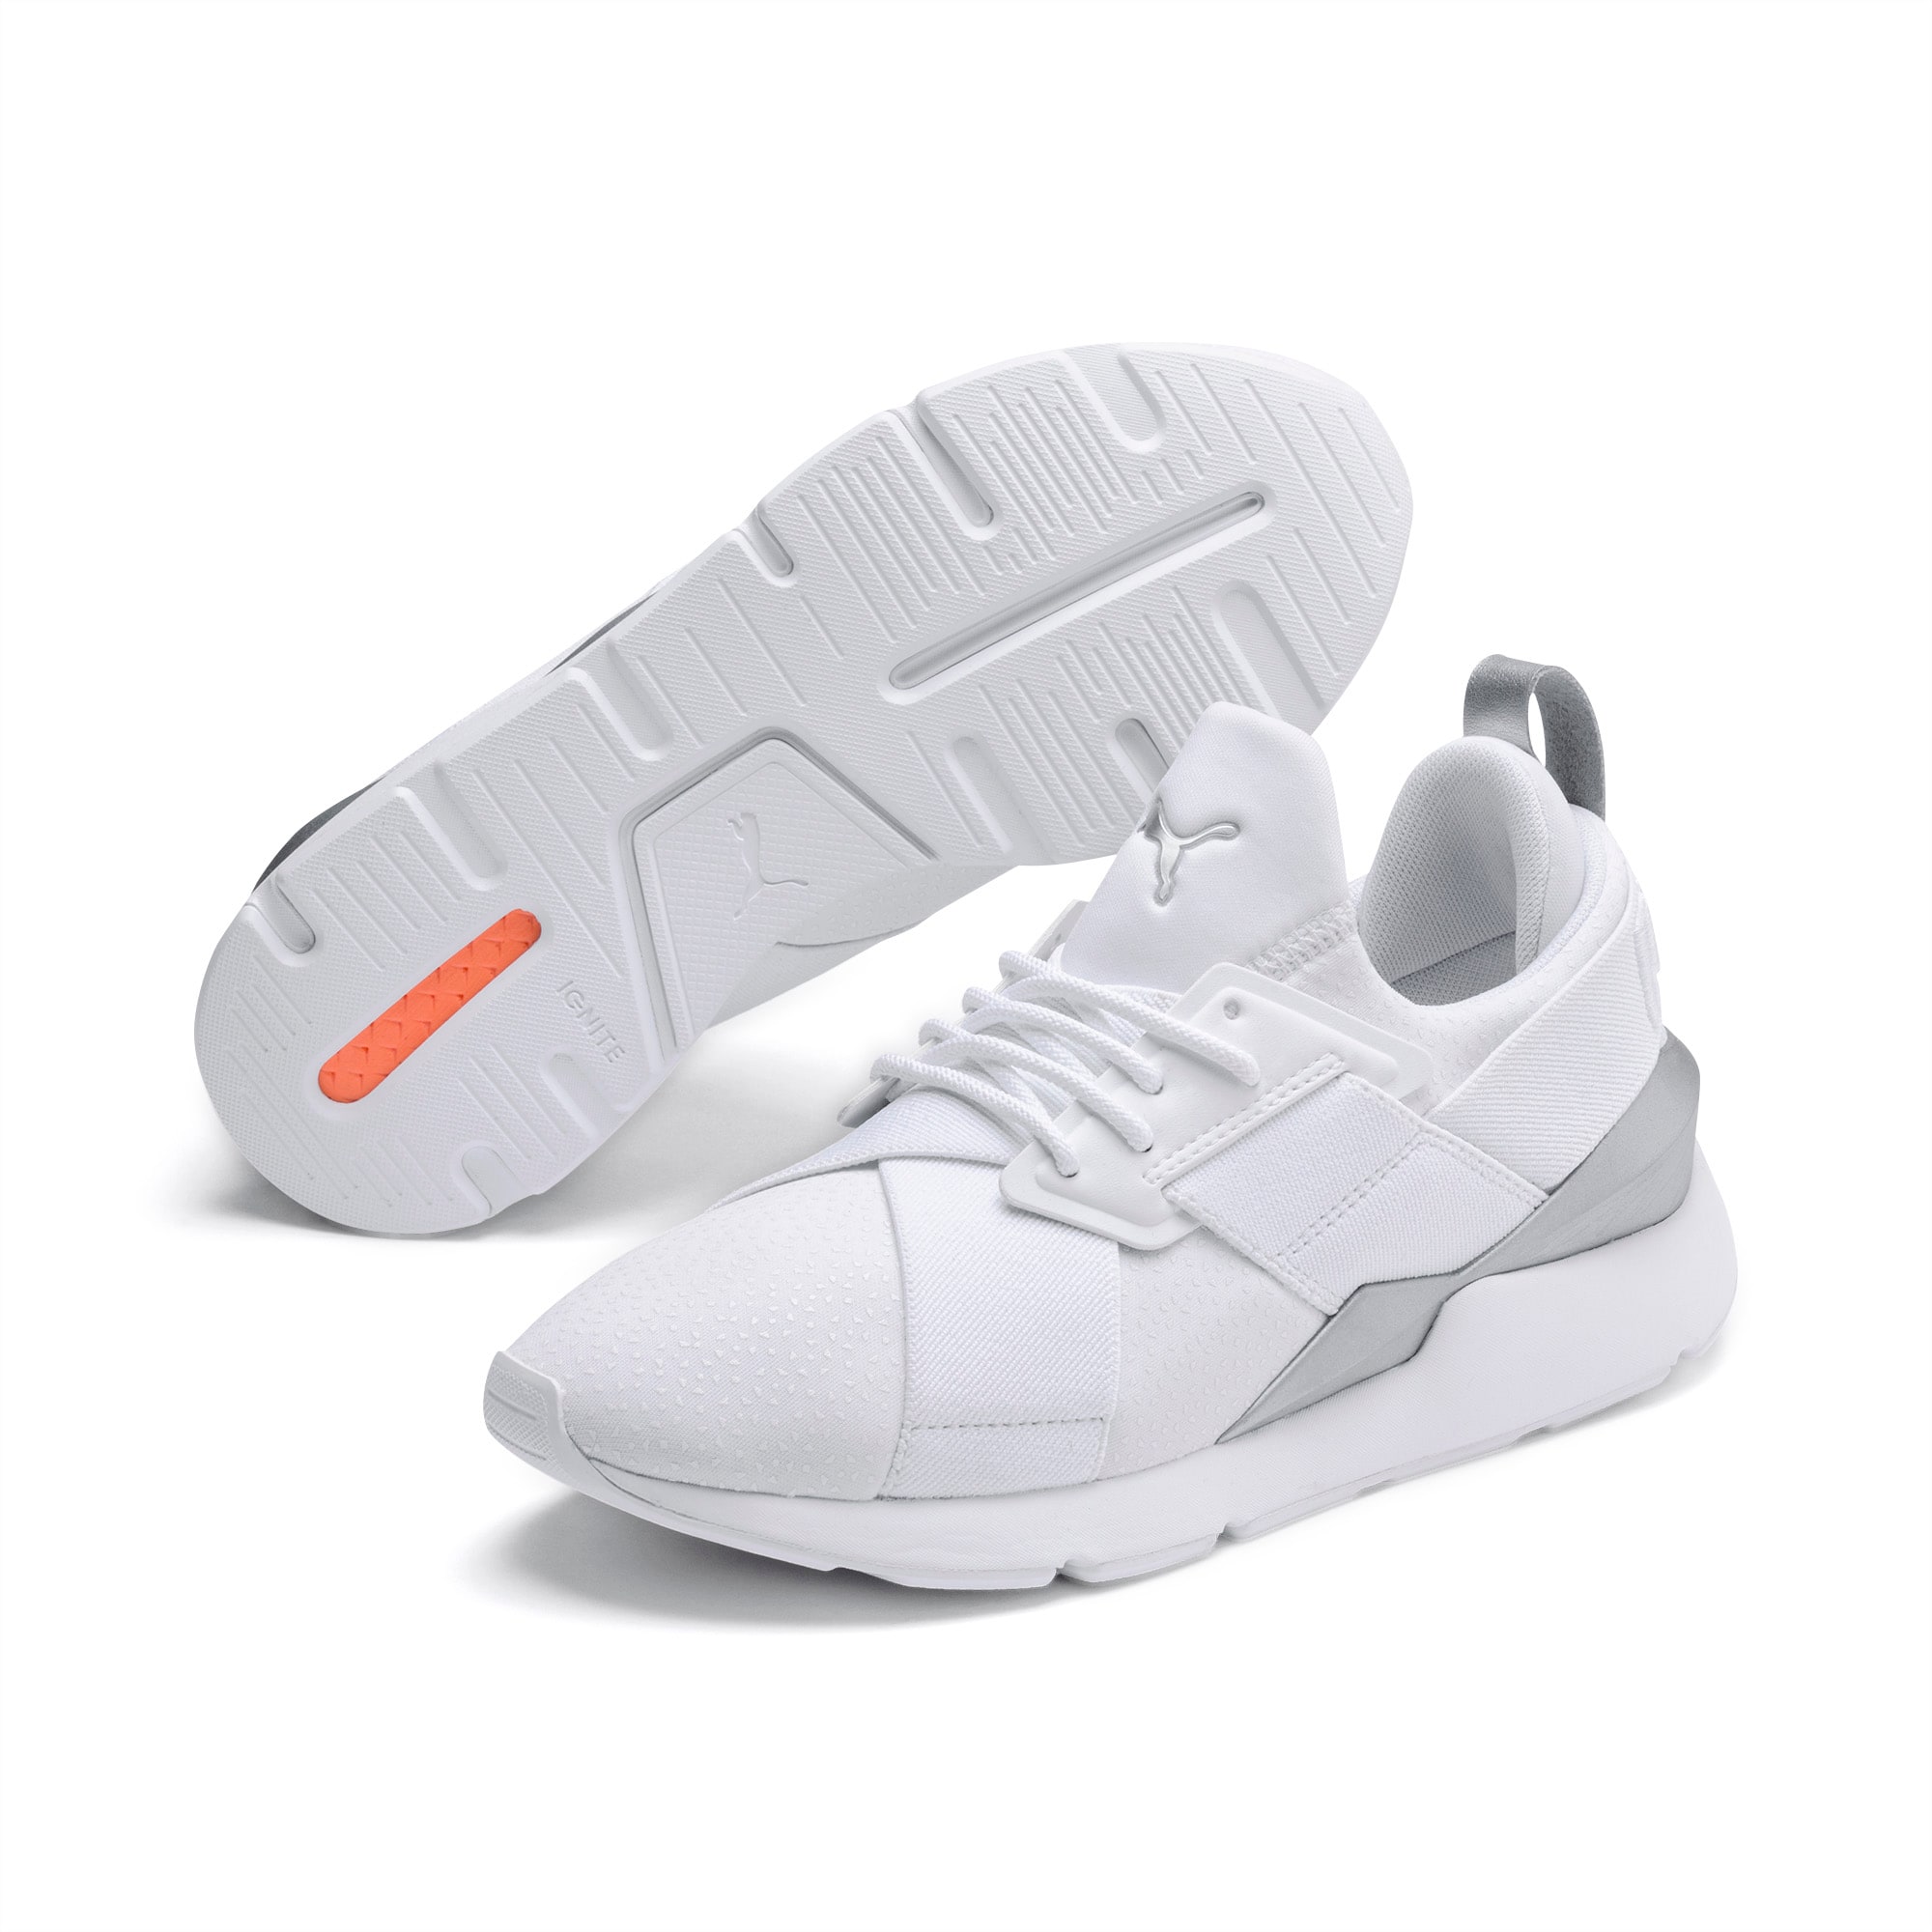 Muse Perf Women's Sneakers | PUMA US